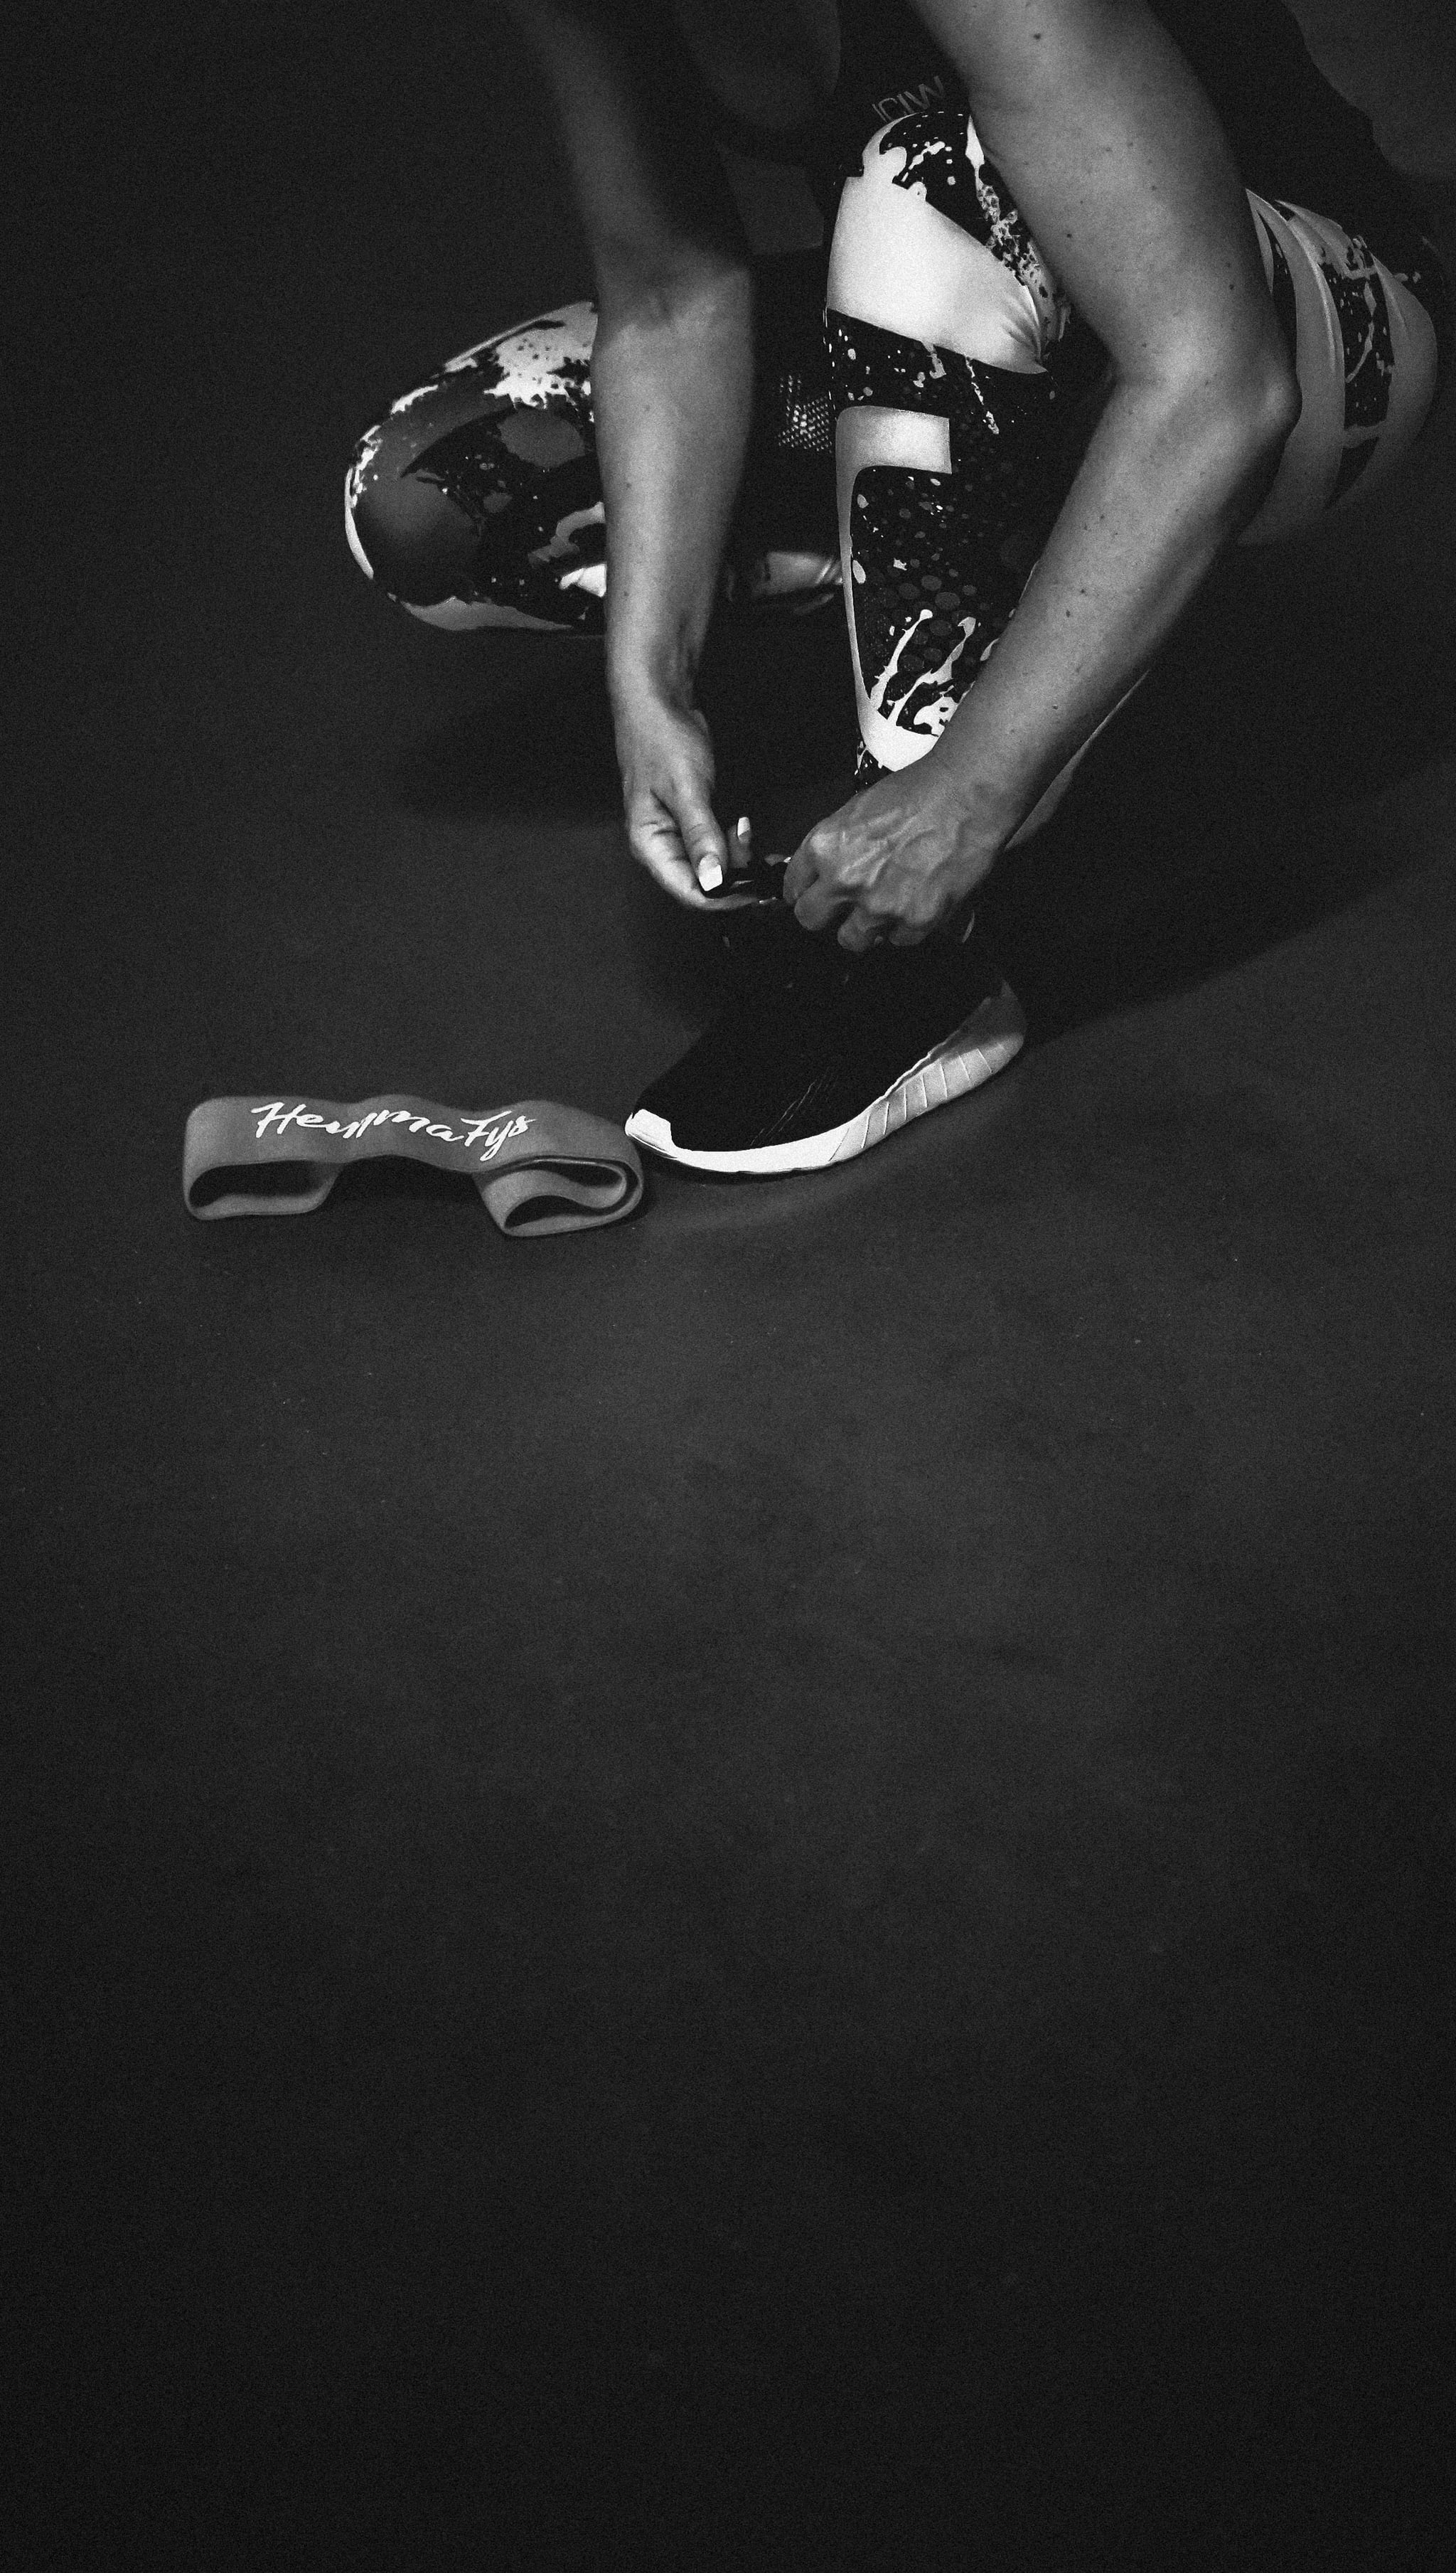 A woman is kneeling down and tying her shoes - Shoes, gym